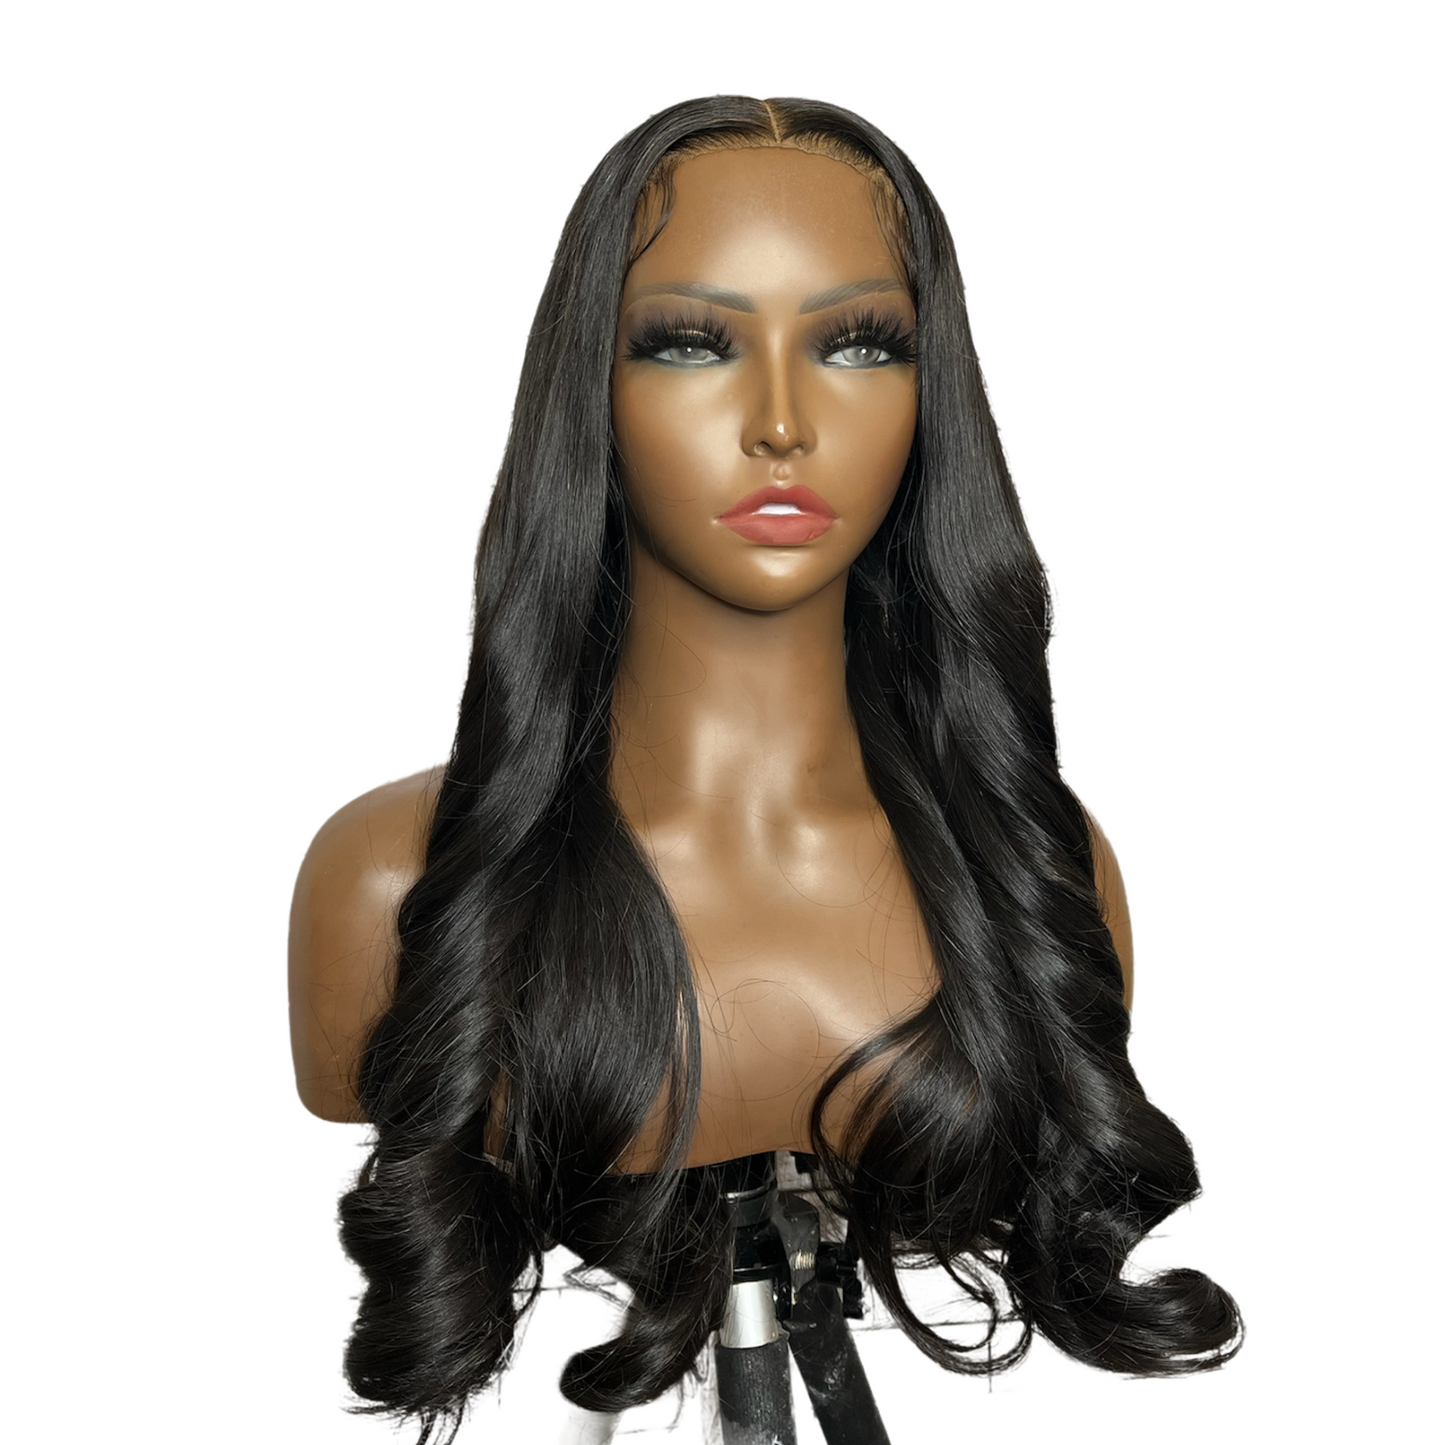 Wig Revamp (Non-Colored)(Repairs/Replacements)